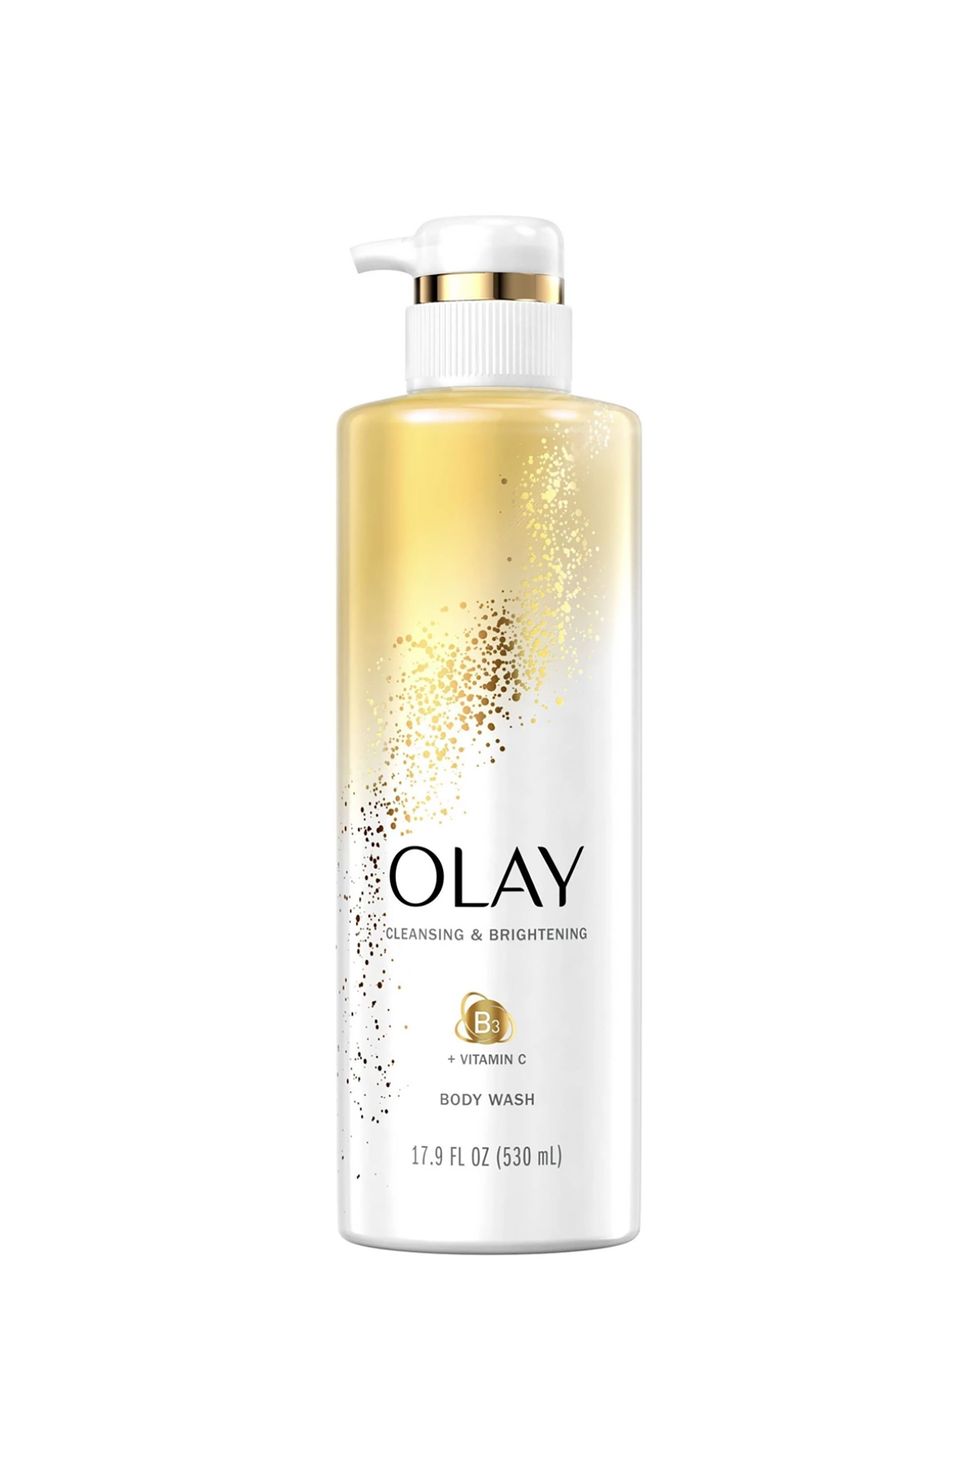 Olay Cleansing and Brightening Body Wash